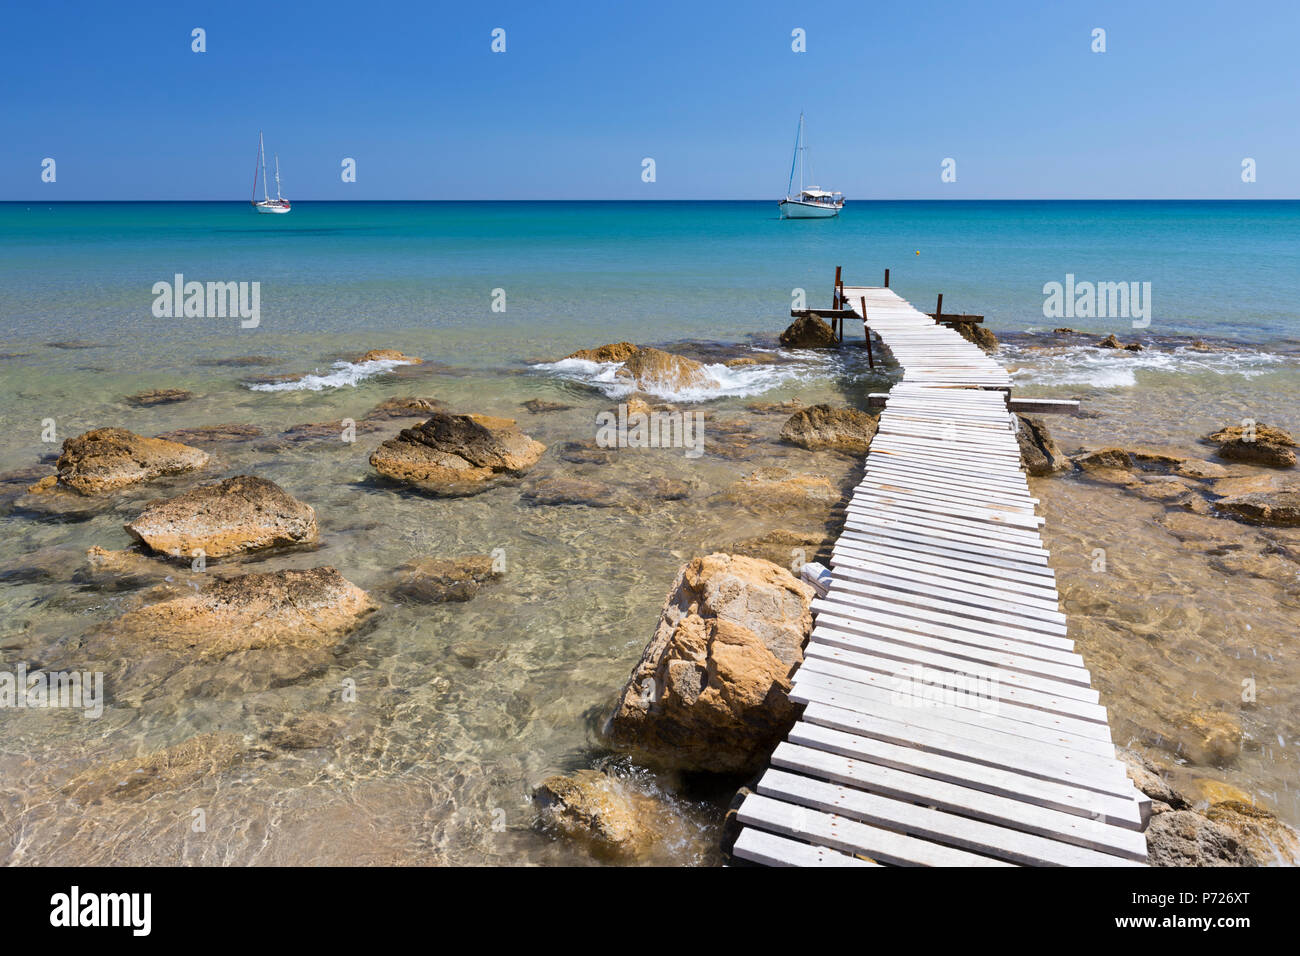 Wooden pier and clear turquoise sea with yachts at Provatas beach, Milos, Cyclades, Aegean Sea, Greek Islands, Greece, Europe Stock Photo